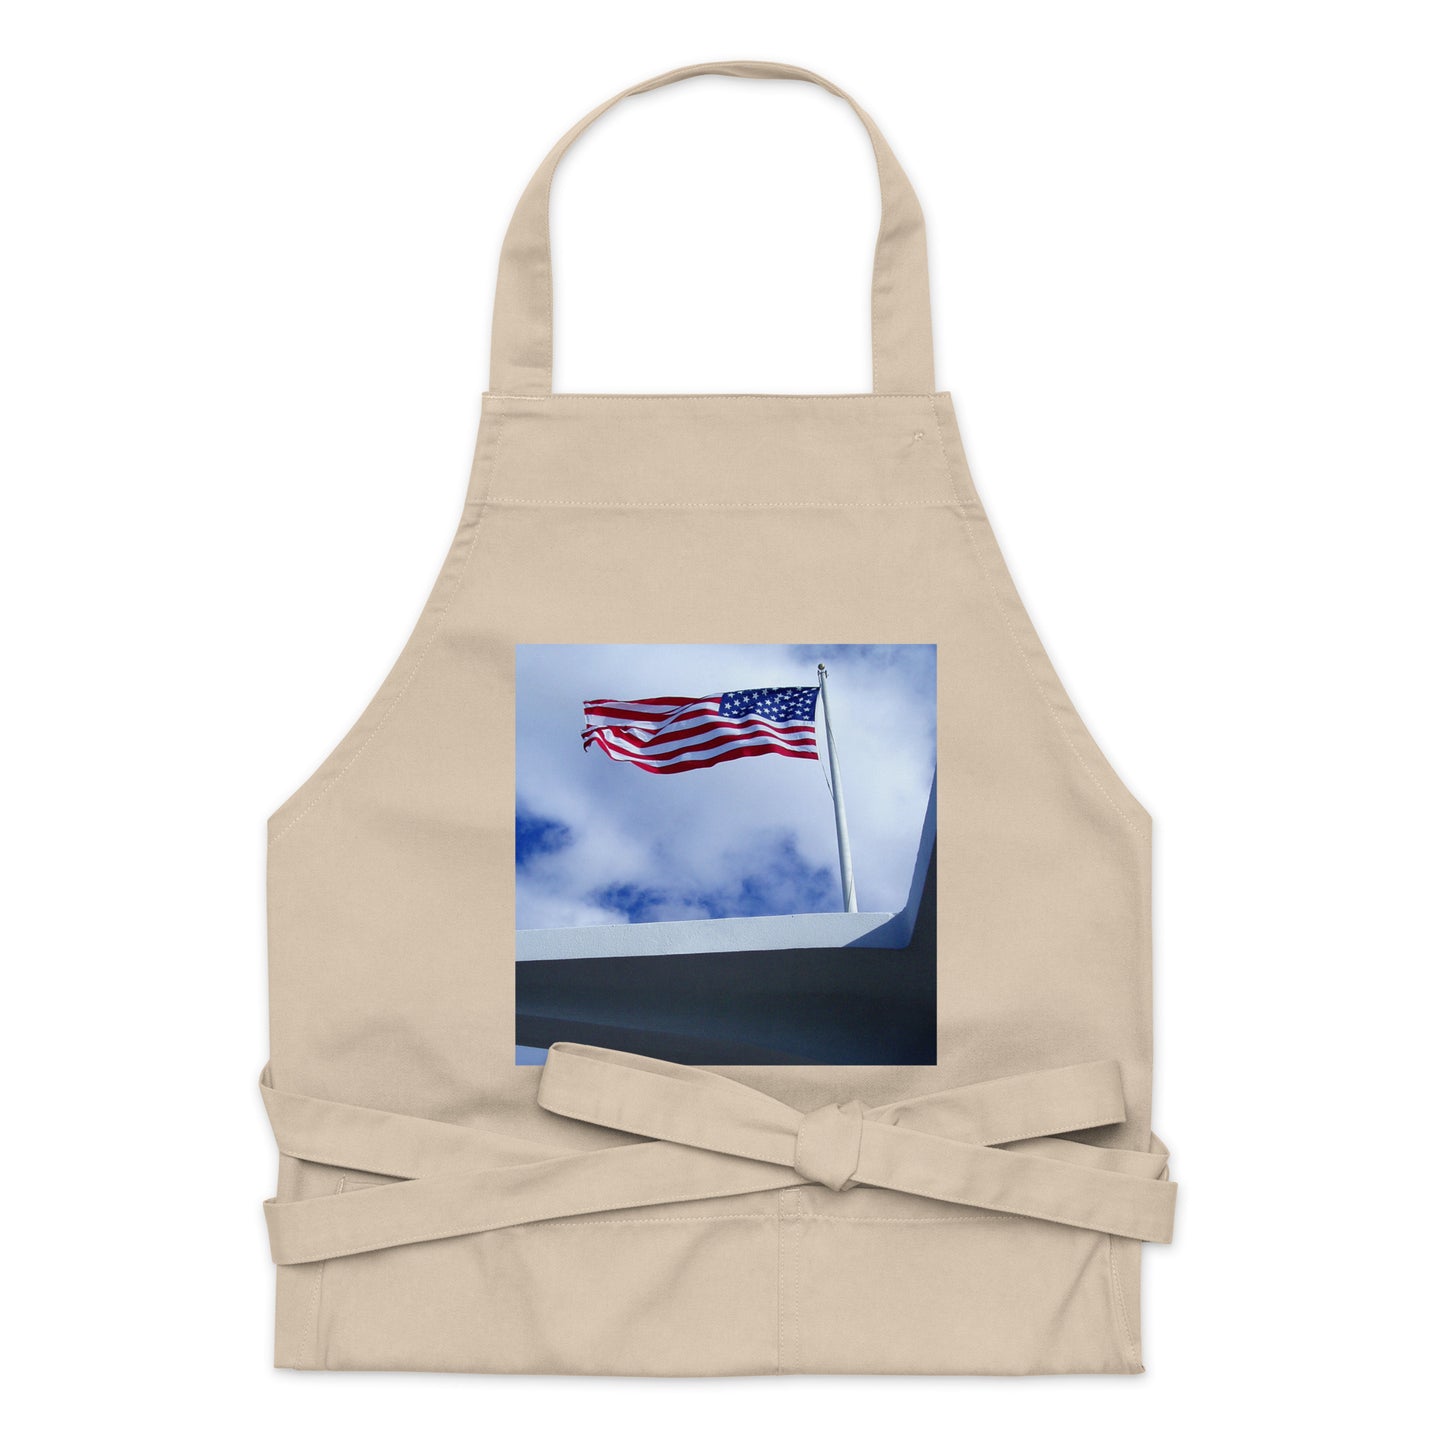 In Solemn Remembrance - Organic cotton apron - Fry1Productions